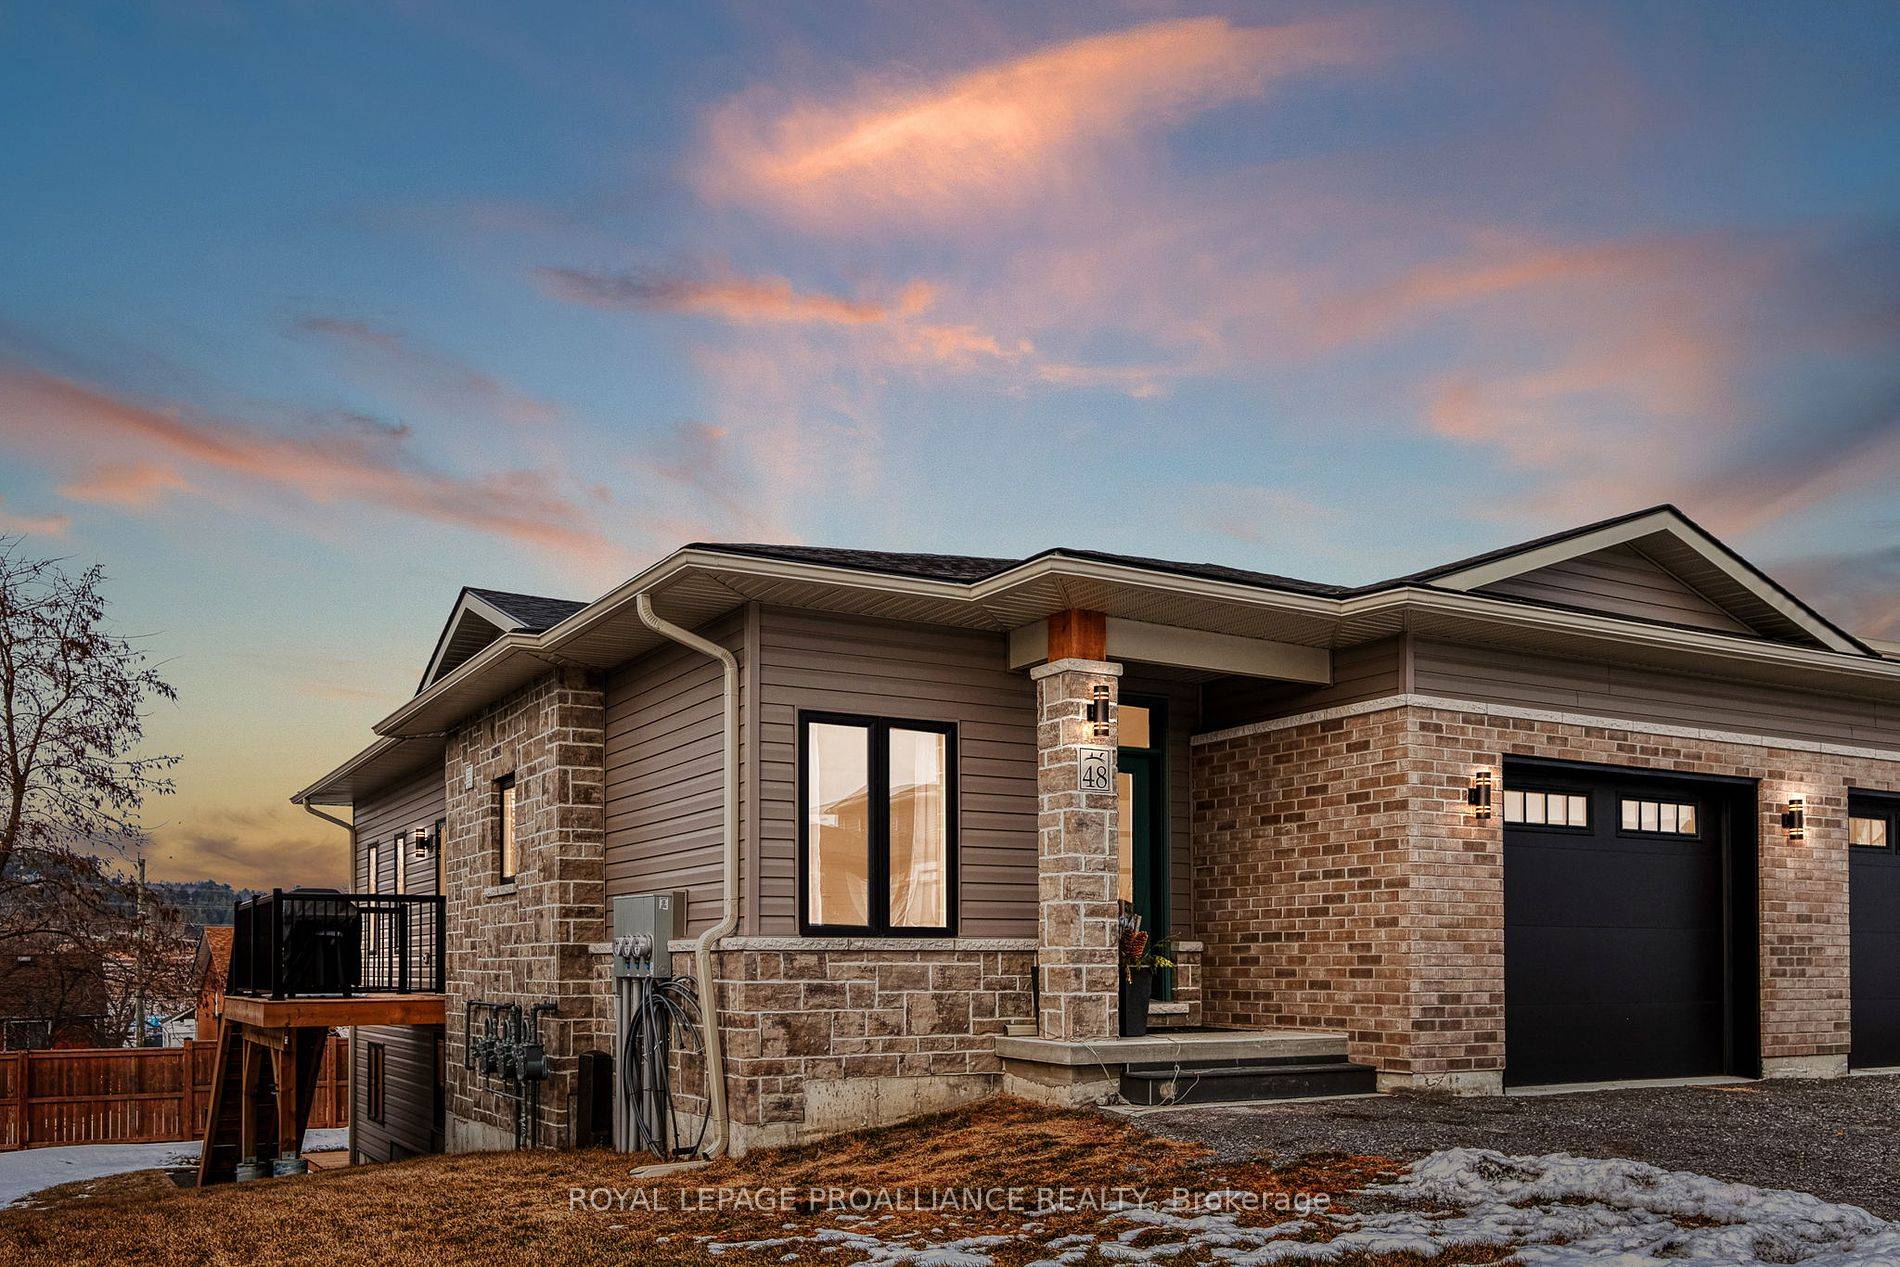 Welcome to Prairie Run Road built by Fidelity Homes, where luxury meets convenience in the heart of the sought after Foxtail Ridge neighborhood.